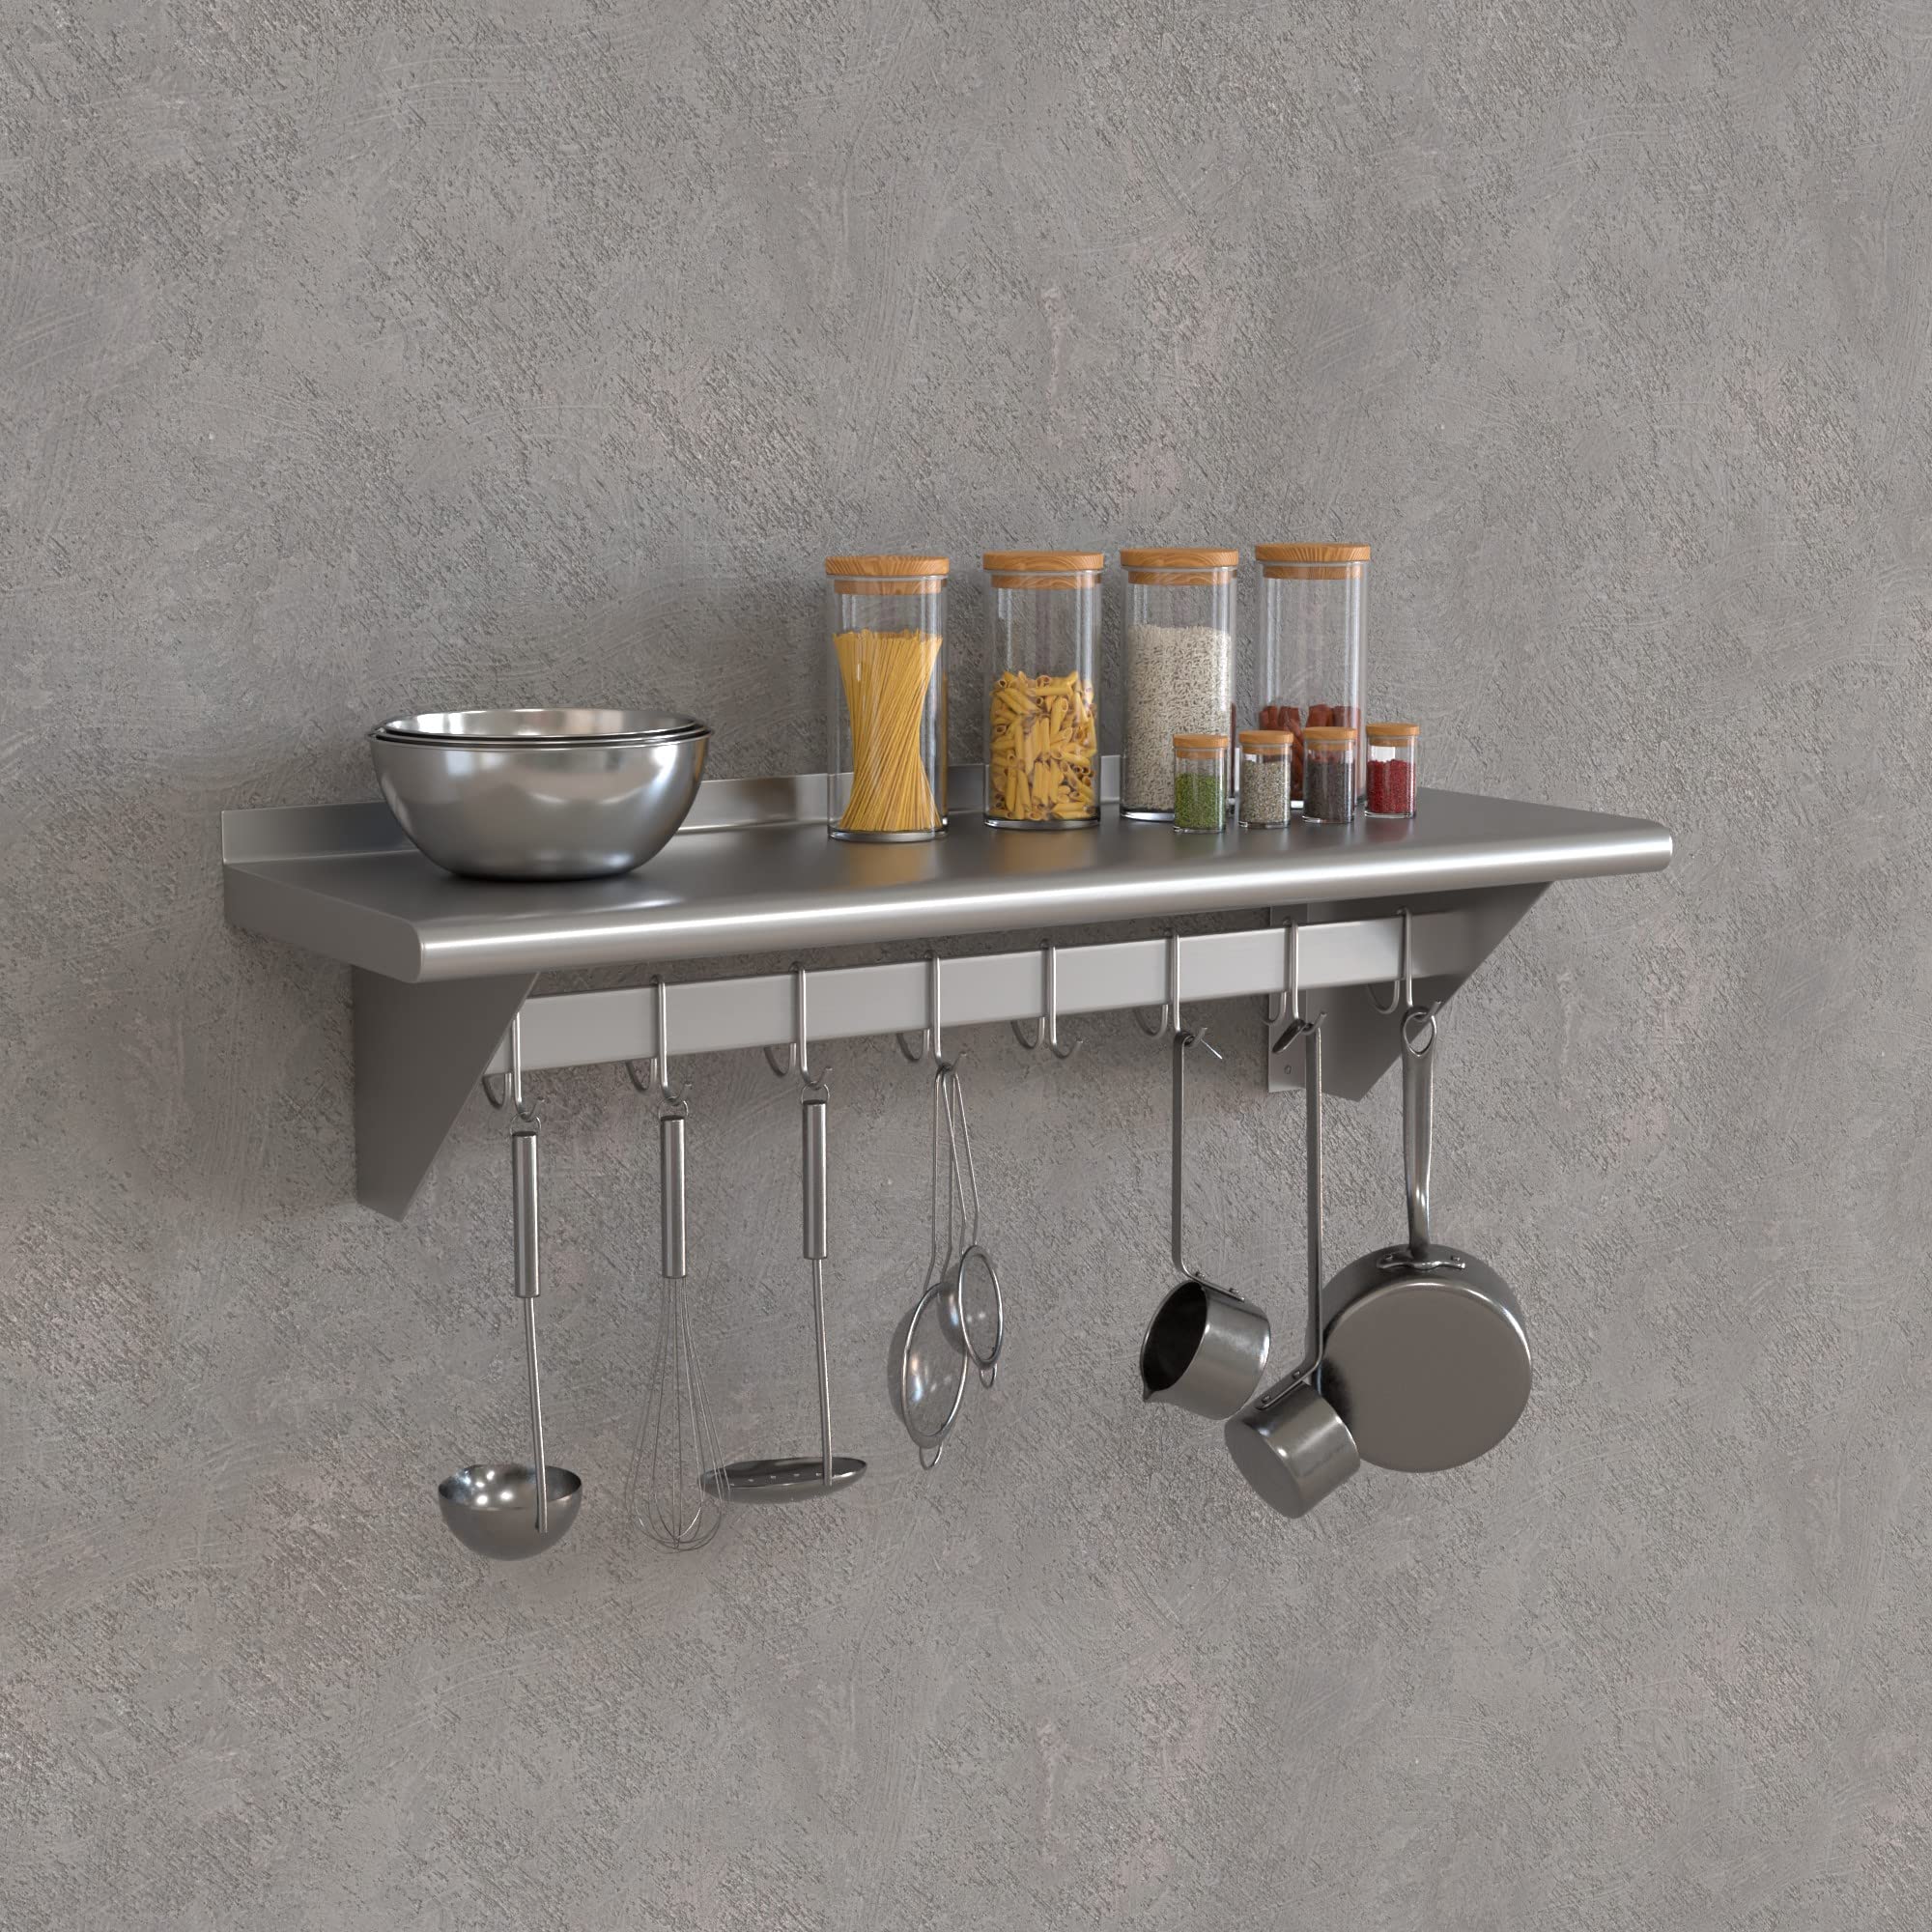 Krollen Industrial 12" x 36" Stainless Steel Wall Mounted Pot Rack with Shelf and 18 Galvanized Hooks